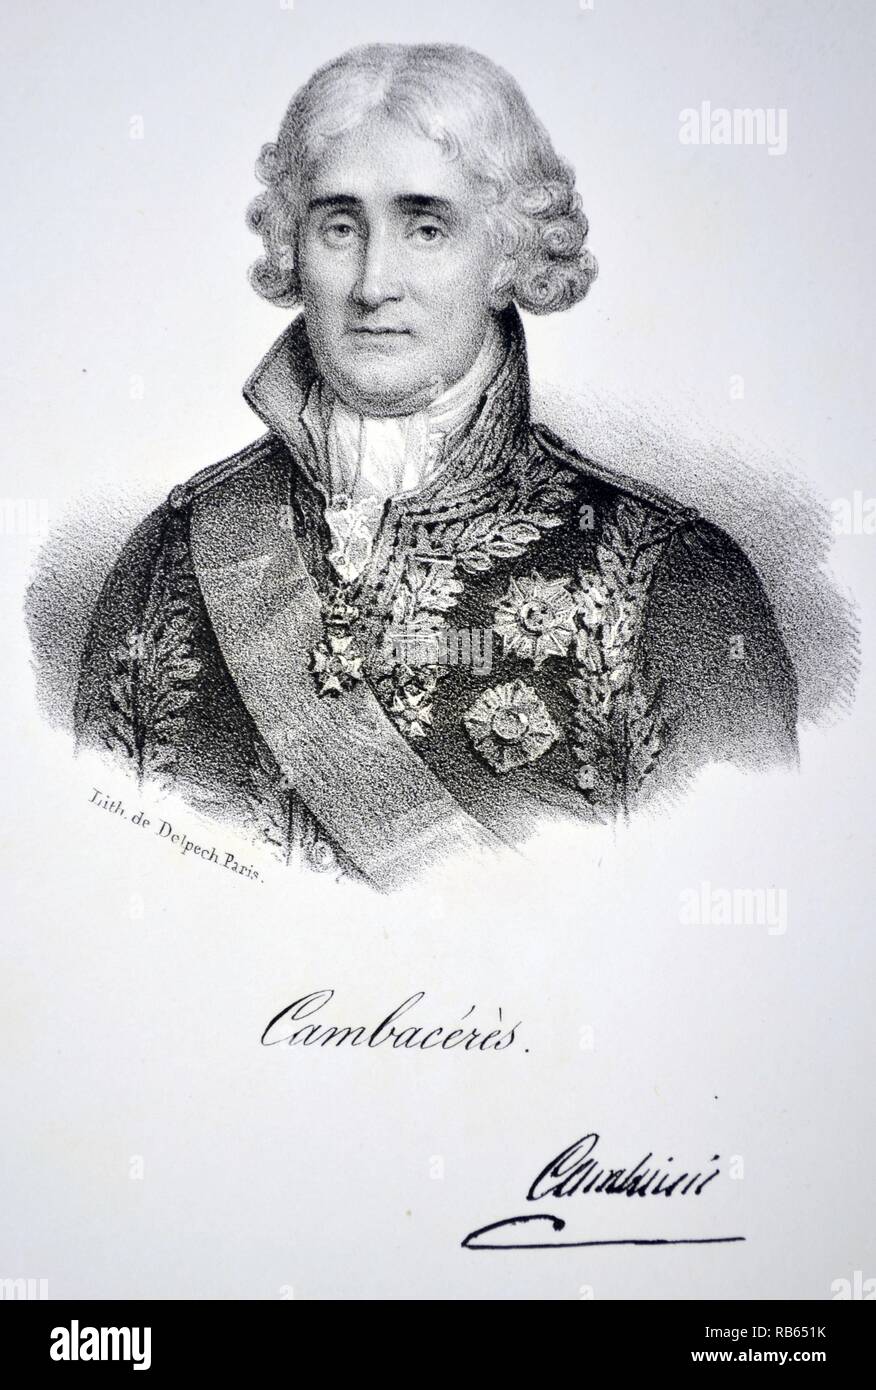 Jean Jacques Regis de Cambaceres, 1st Duc de Cambaceres (1753-1824) French  lawyer and statesman, author of the Napoleonic Code. Lithograph, Paris,  1832 Stock Photo - Alamy